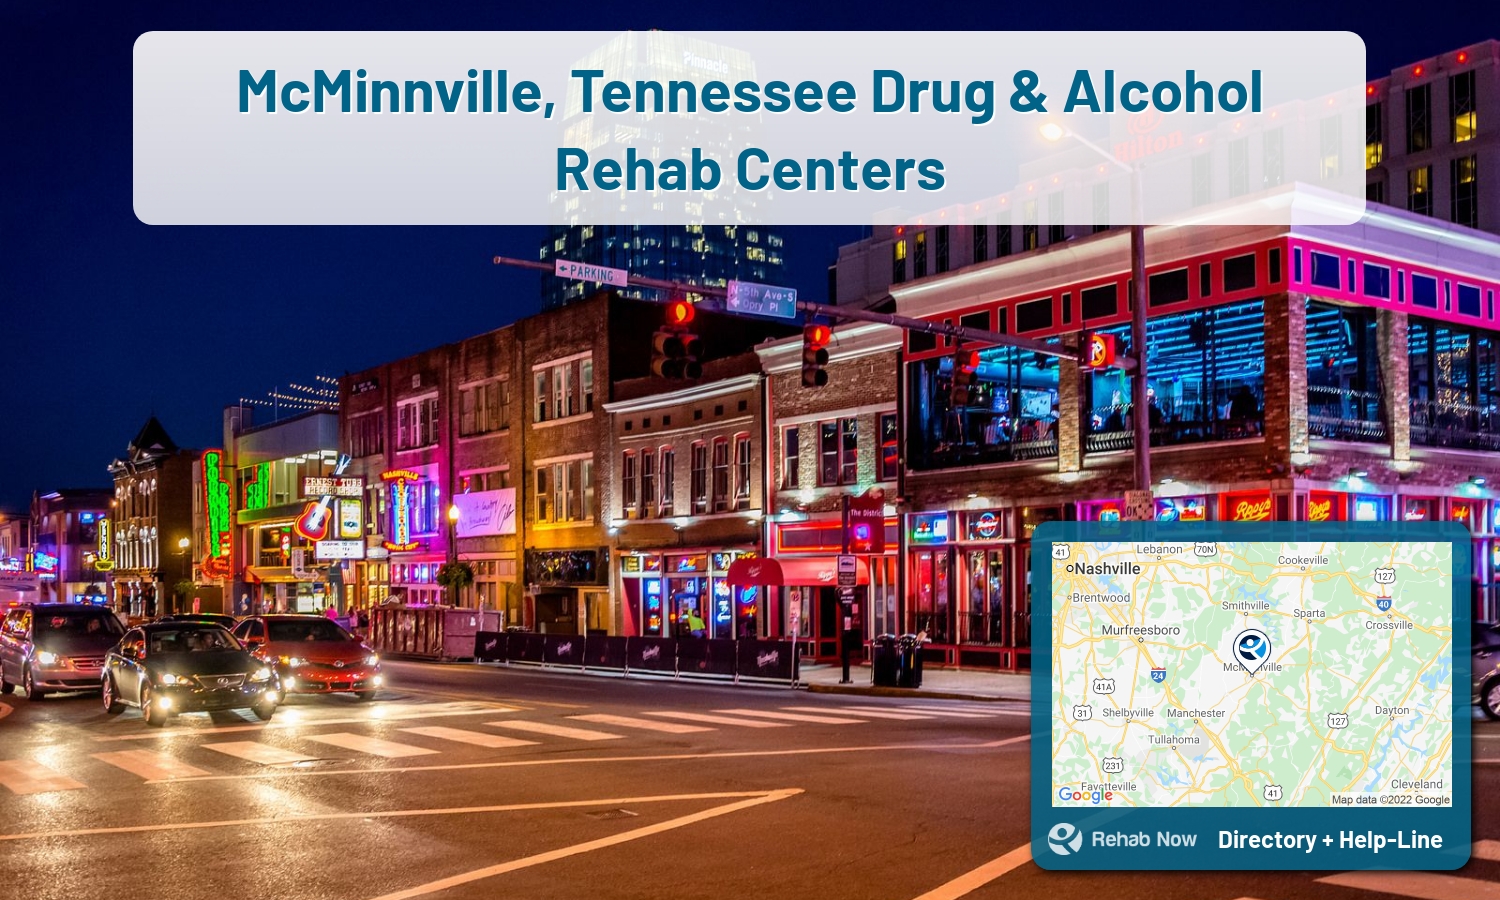 Find drug rehab and alcohol treatment services in McMinnville. Our experts help you find a center in McMinnville, Tennessee